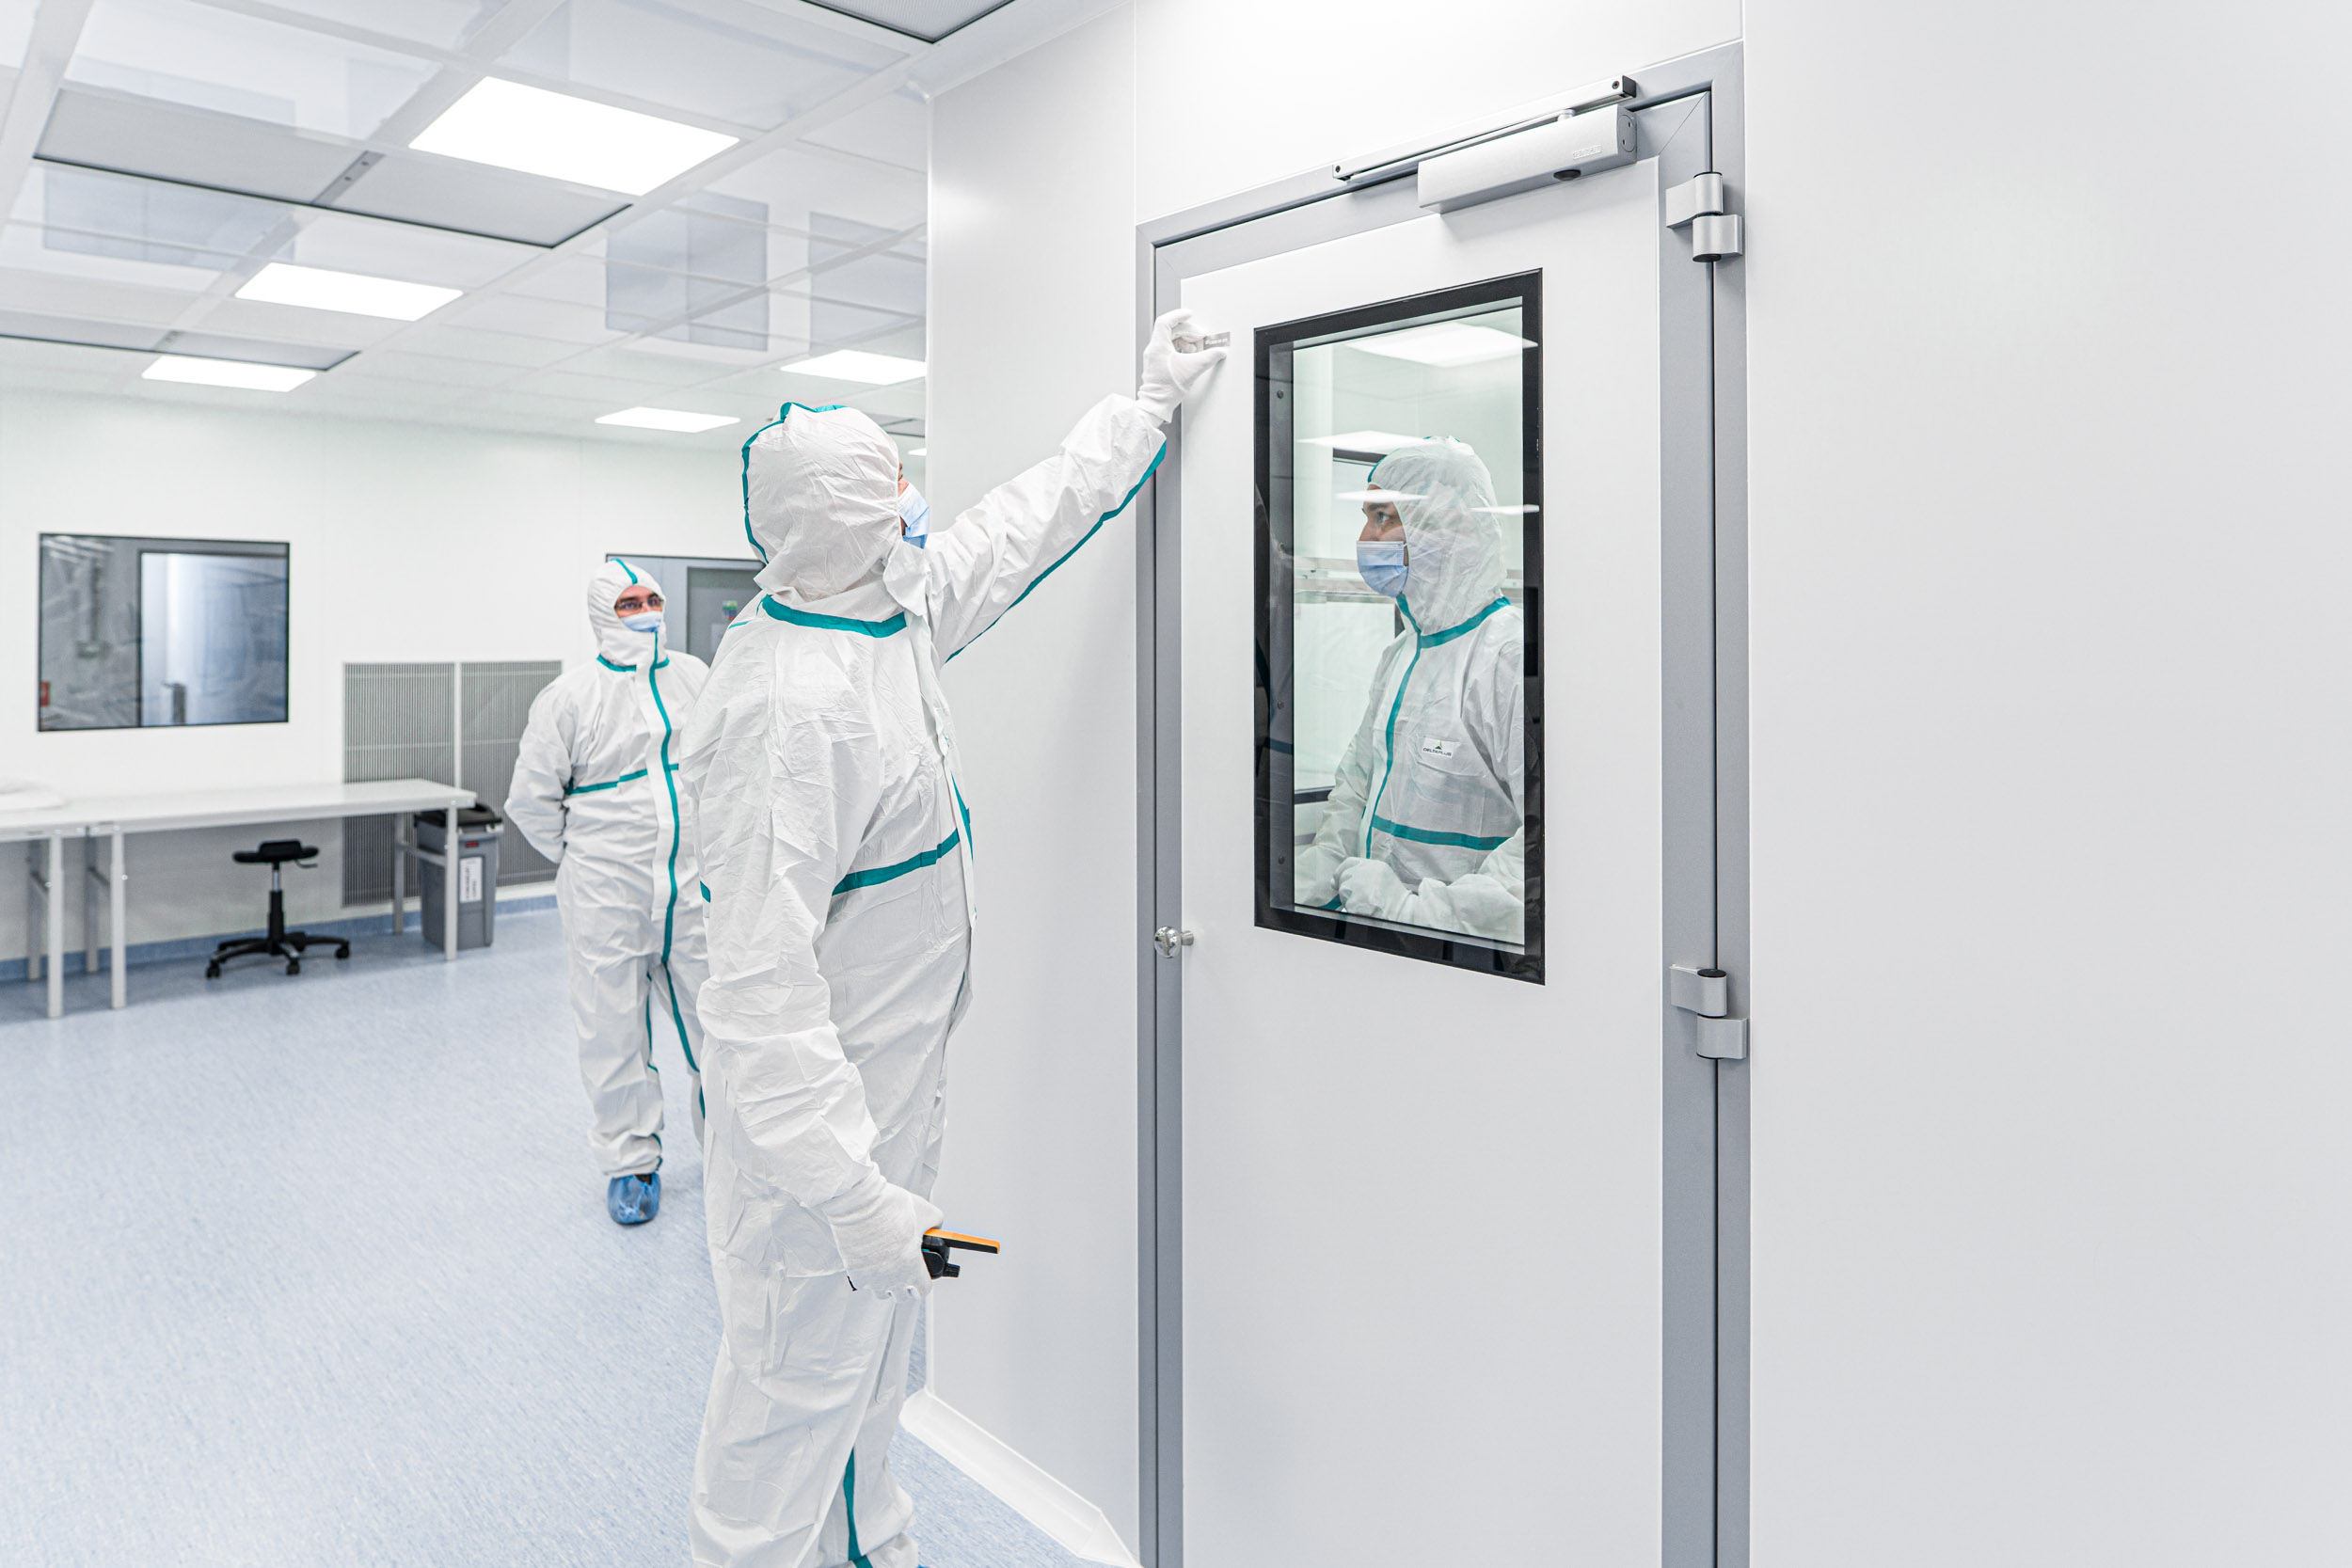 Cleanroom qualifications and validations, accredited measurements, professional approach and successful validation completion